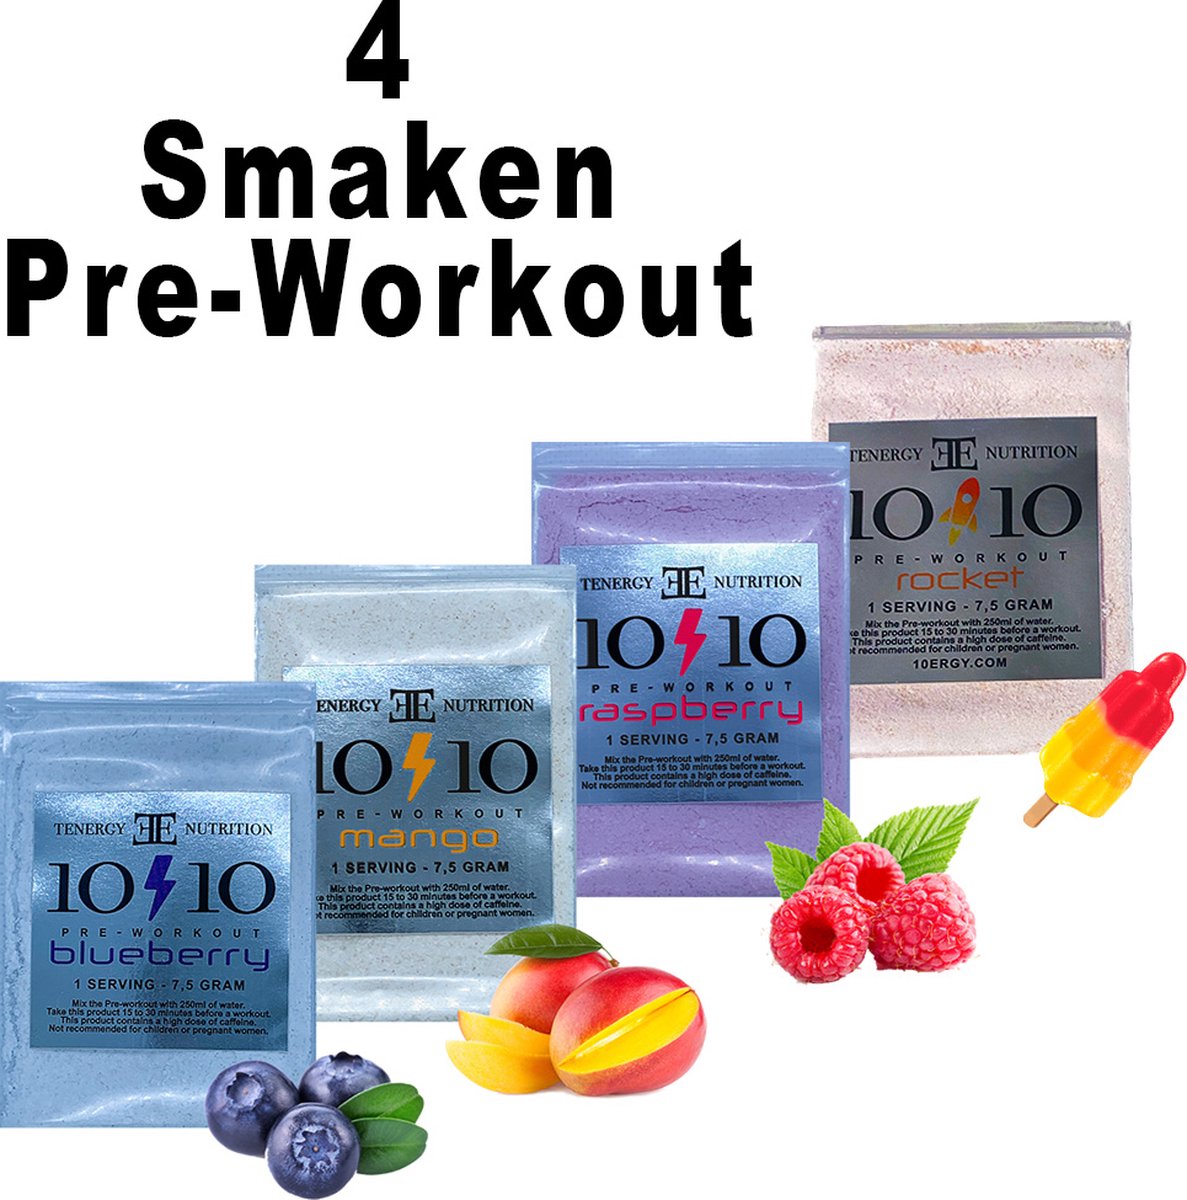 10ERGY - Pre-workout Sample Pack - Fitness gym Supplement - Raspberry, Rocket, Mango & Blueberry (4x 1 dosering) - pwo tester